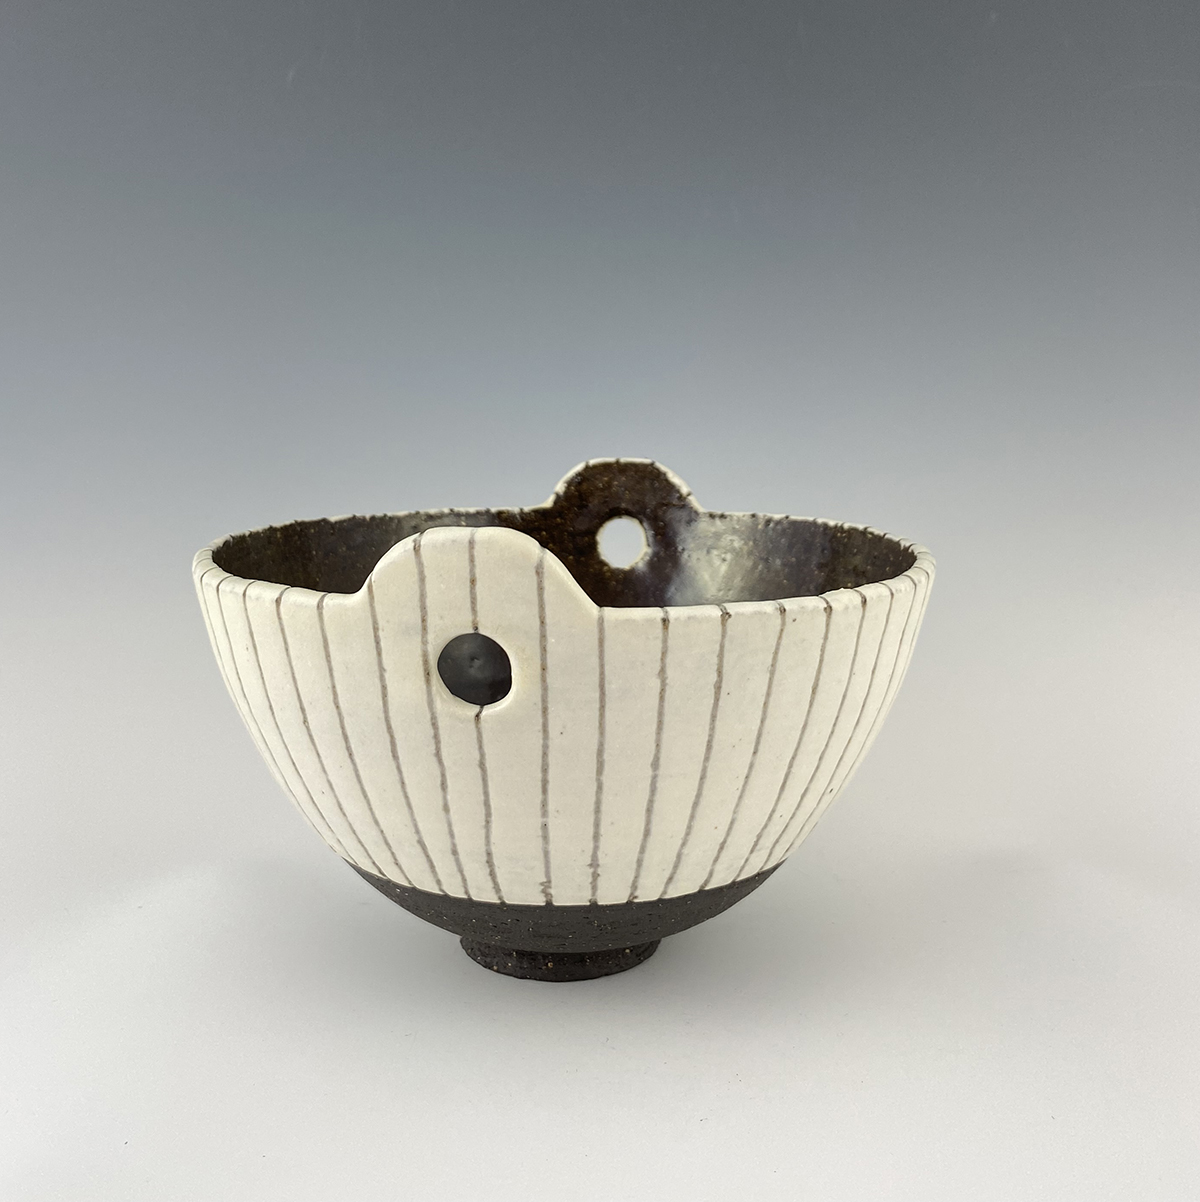 Black and white bowl with stripes